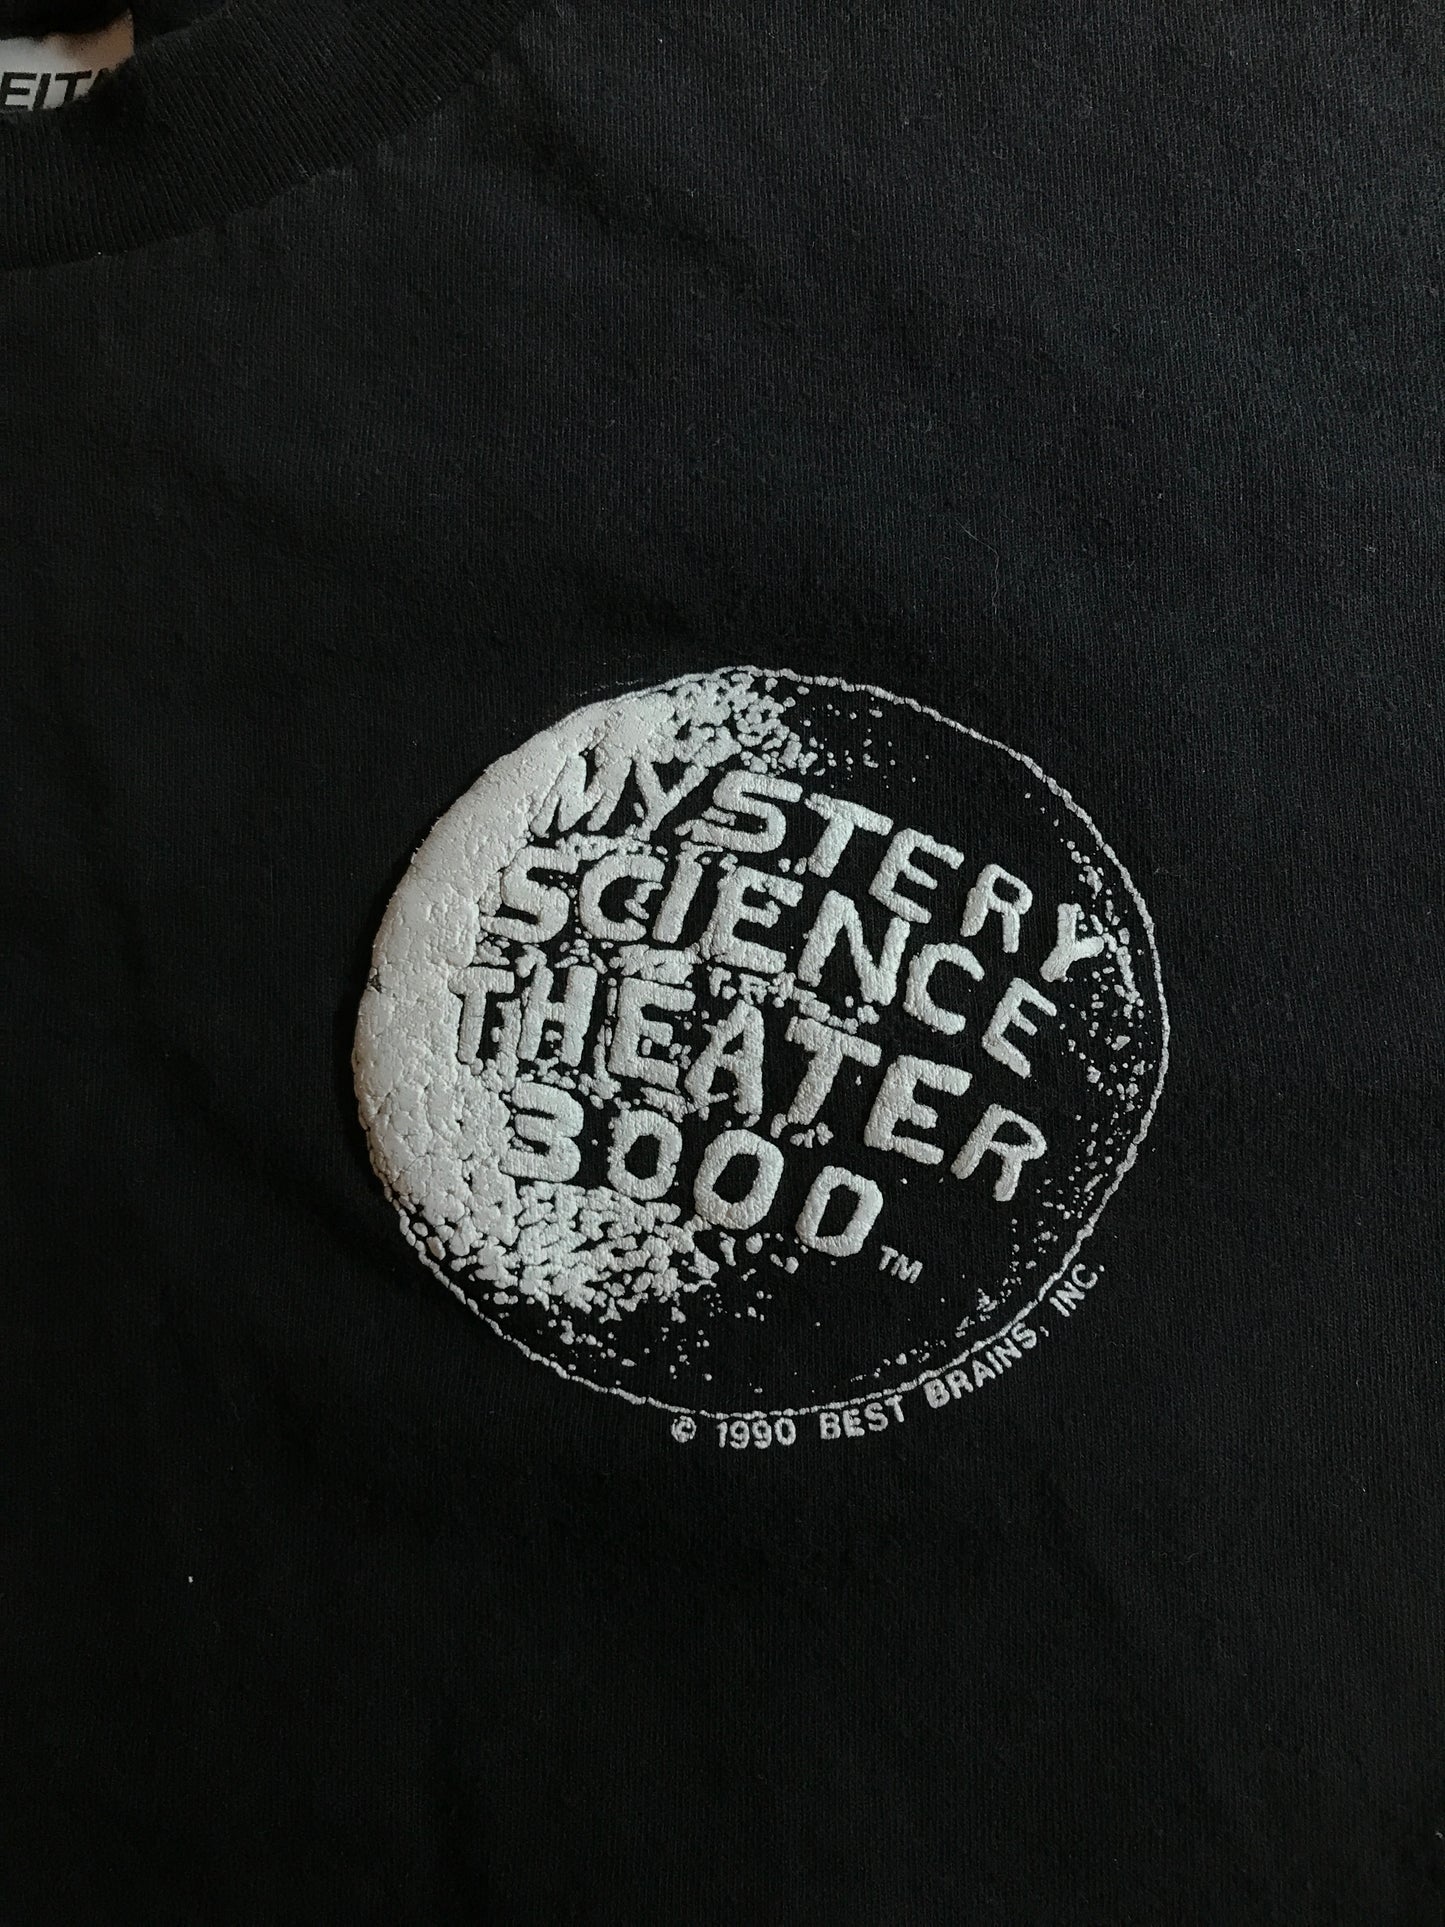 Playera Mystery Science Theater 3000 Vintage